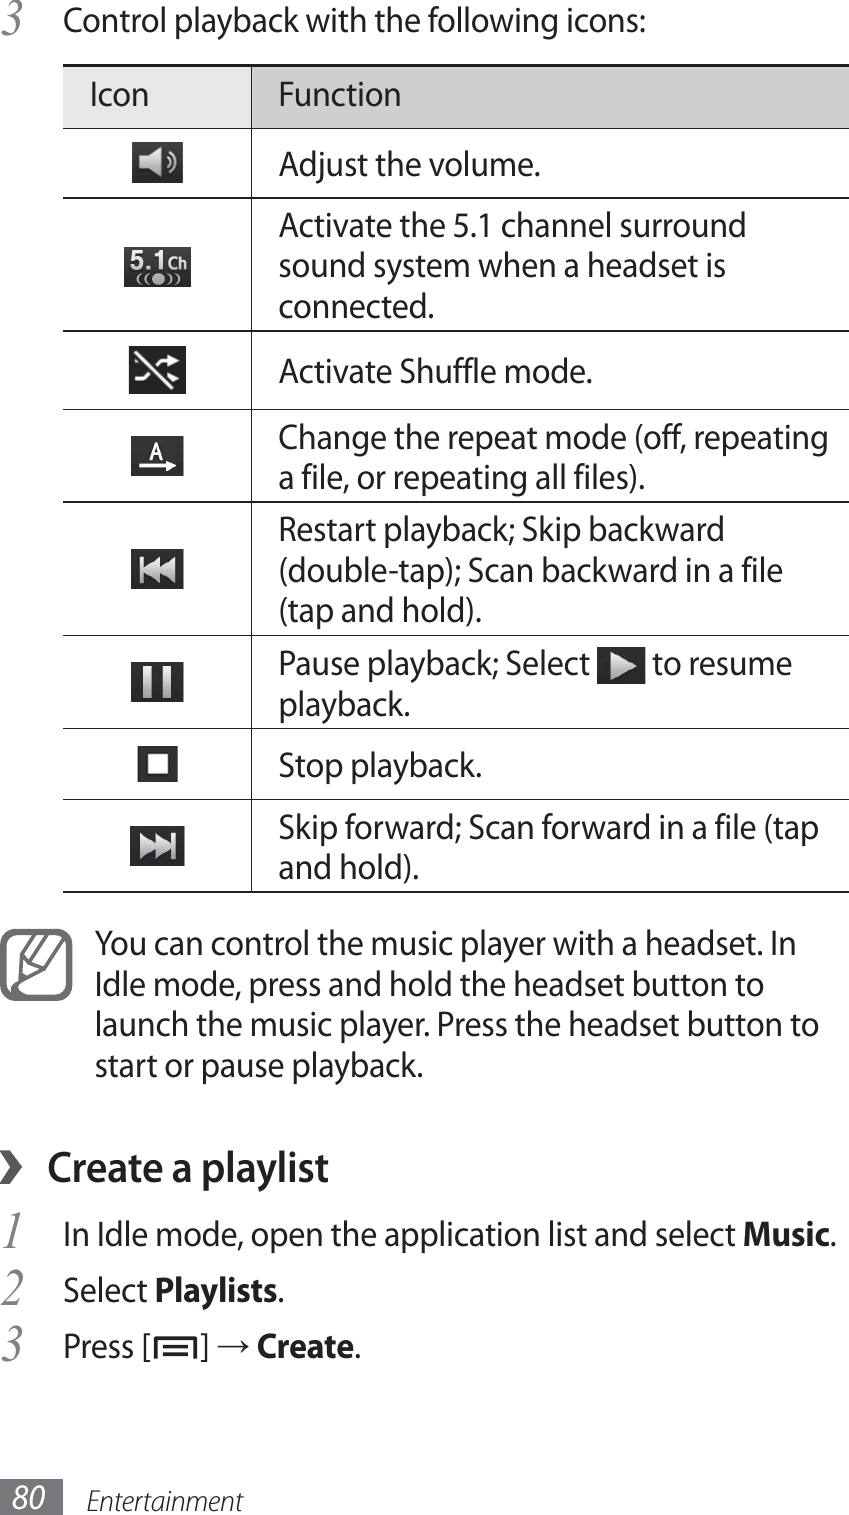 Entertainment80Control playback with the following icons:3 Icon FunctionAdjust the volume. Activate the 5.1 channel surround sound system when a headset is connected.Activate Shuffle mode.Change the repeat mode (off, repeating a file, or repeating all files).Restart playback; Skip backward (double-tap); Scan backward in a file (tap and hold).Pause playback; Select   to resume playback.Stop playback.Skip forward; Scan forward in a file (tap and hold).You can control the music player with a headset. In Idle mode, press and hold the headset button to launch the music player. Press the headset button to start or pause playback.Create a playlist ›In Idle mode, open the application list and select 1 Music.Select 2 Playlists.Press [3 ] → Create.